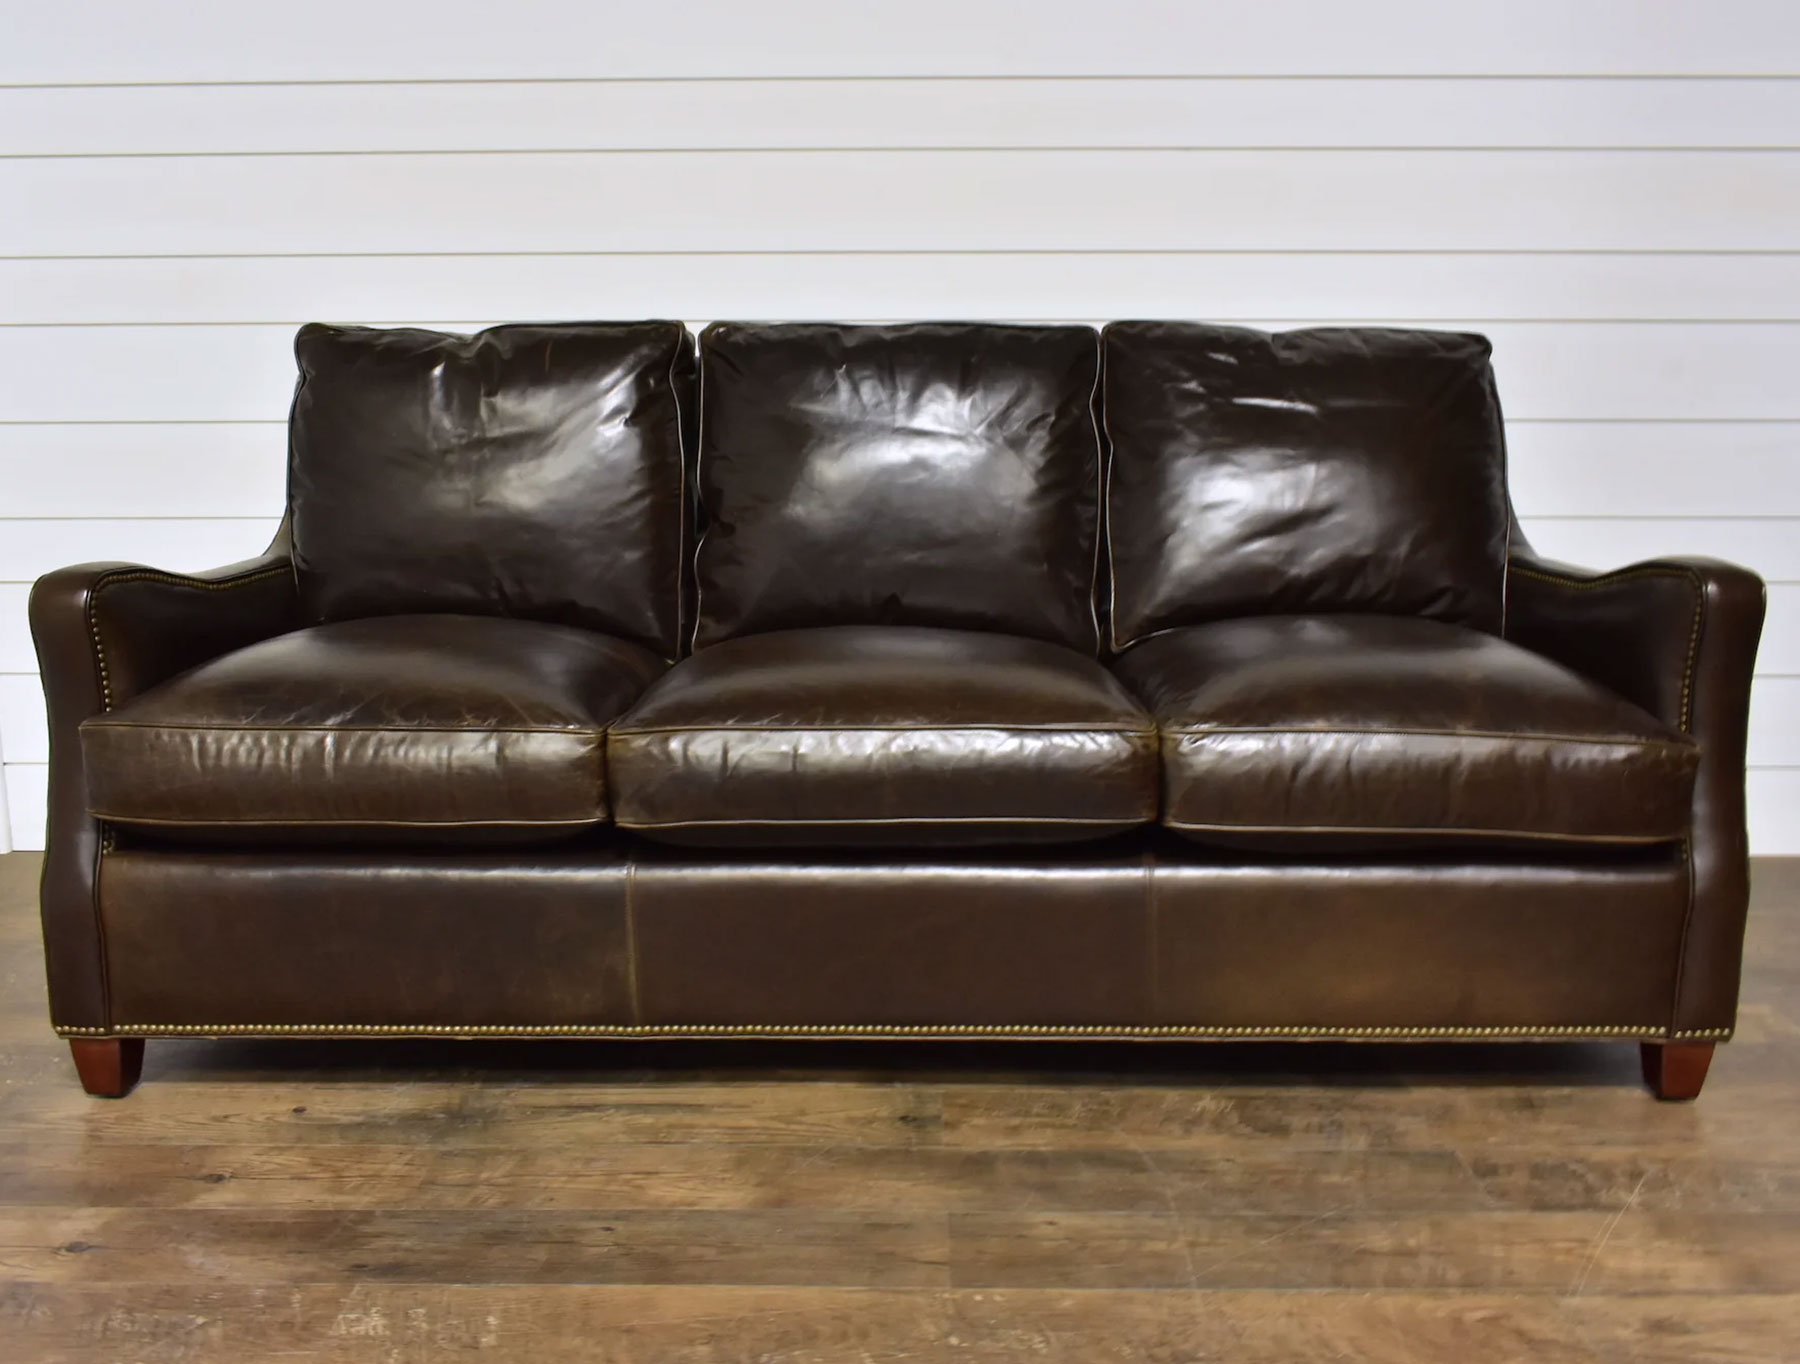 Our House 525-83 Dowgate Hill Sofa in Java Love Leather